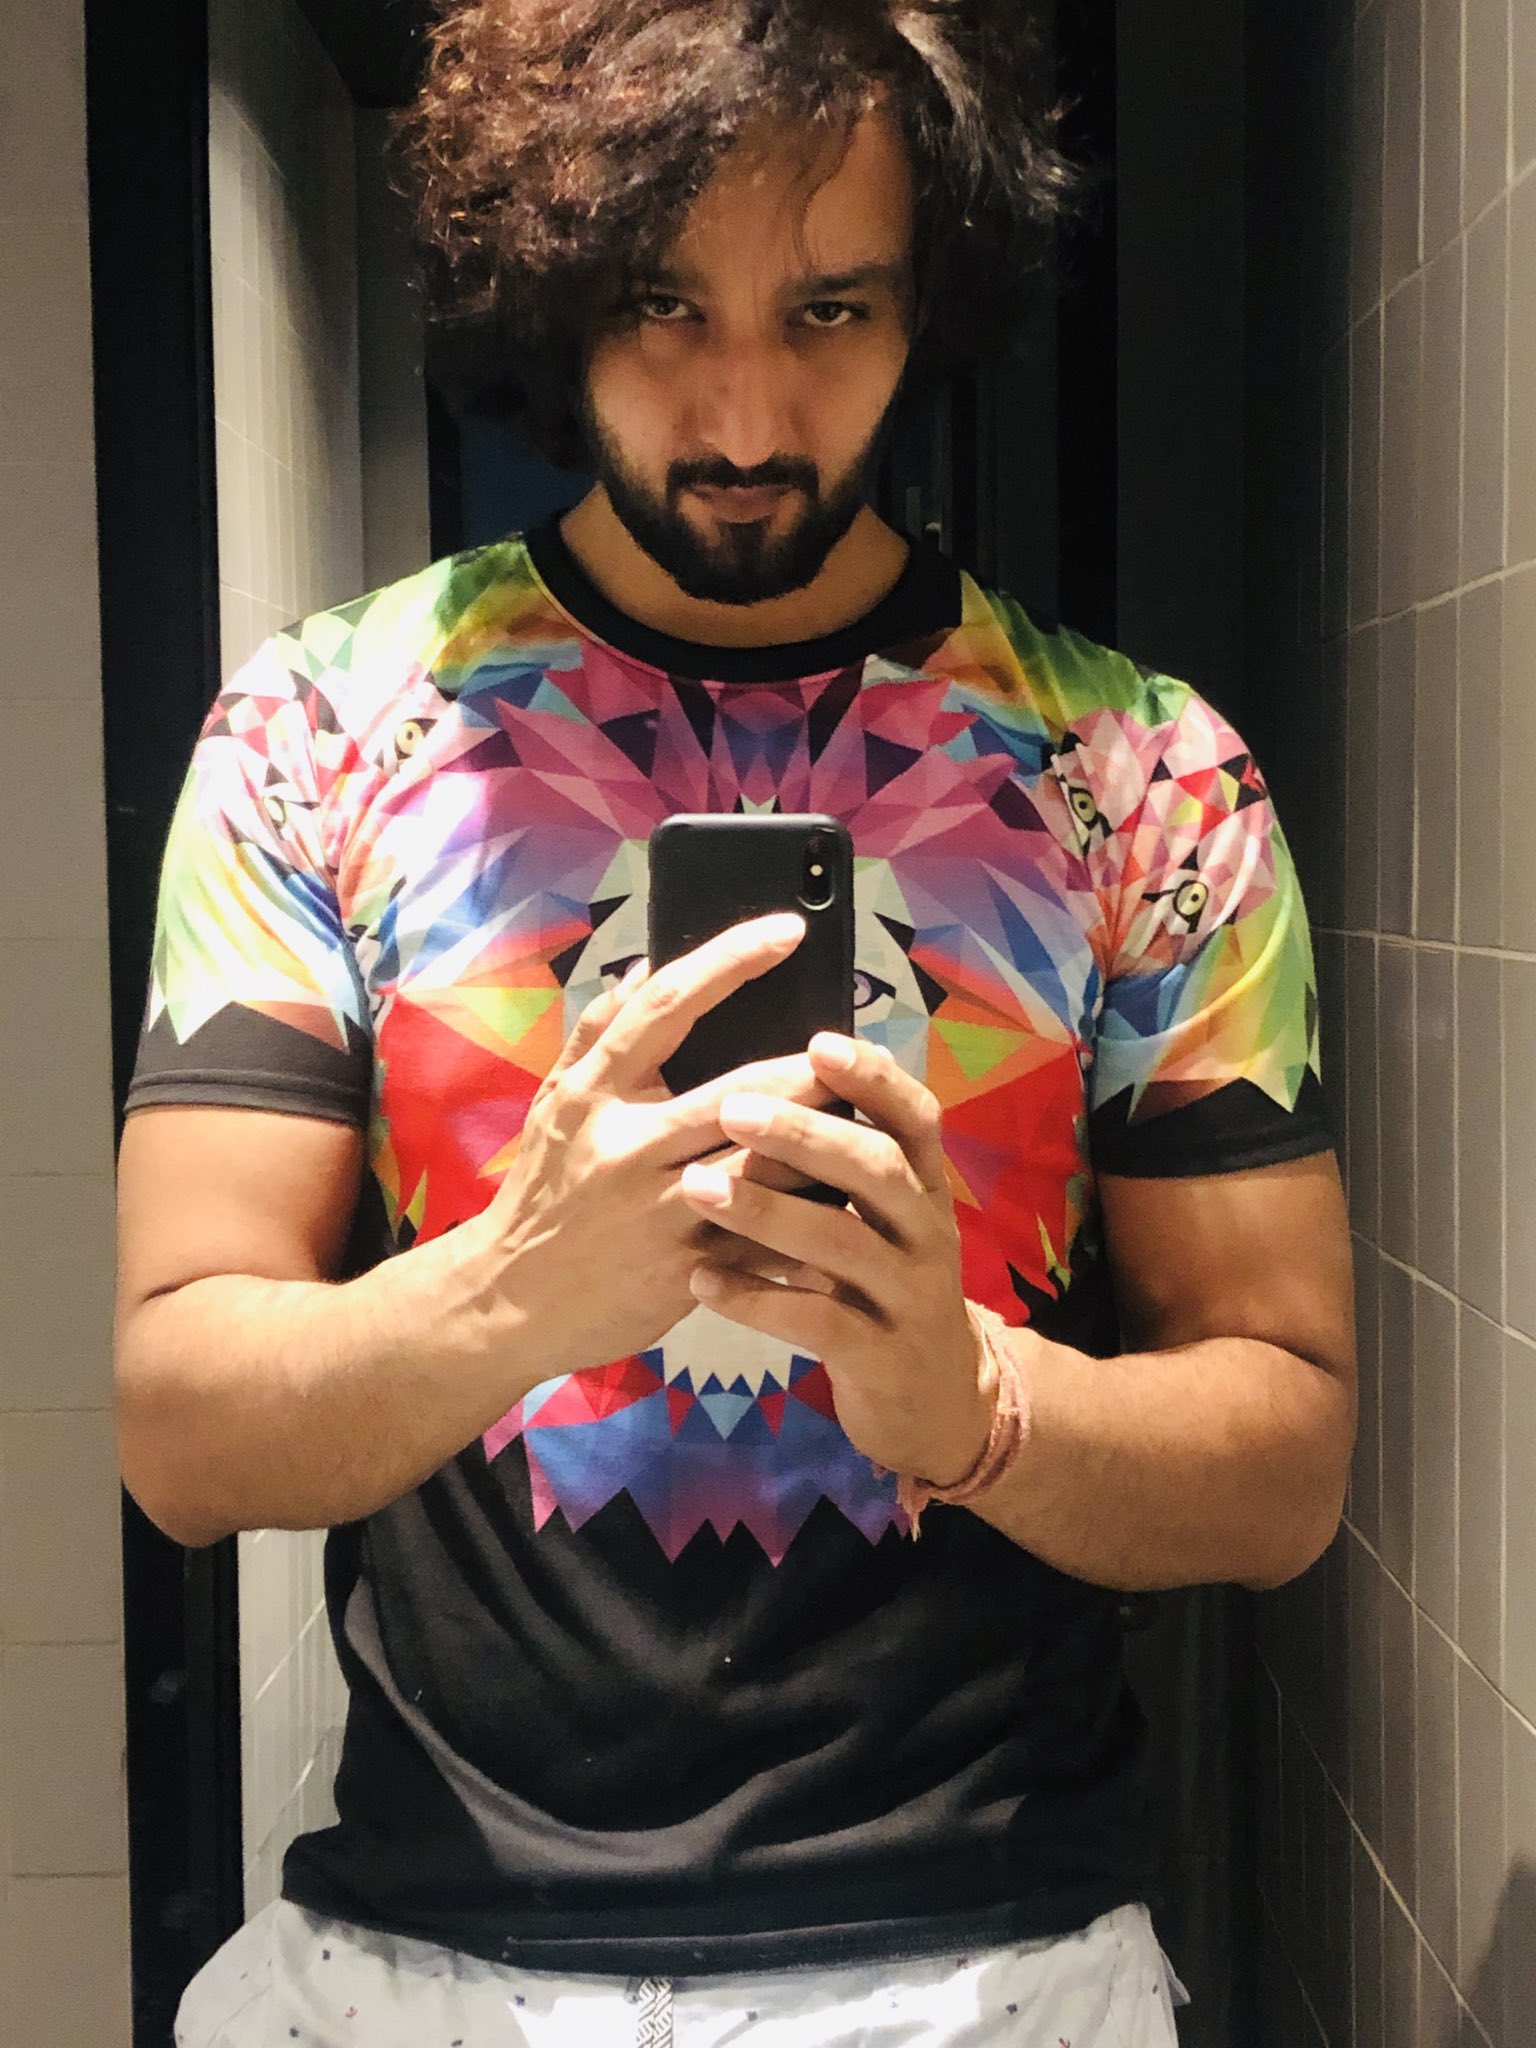 Sourabh Raaj Jain snaps a mirror selfie in October 2019. The room is dark, with mushroom coloured tiles, and is lit only from directly above and to one side. Sourabh has long dark curly hair and a thick, trimmed beard and moustache, and is wearing a black and multicoloured t-shirt and white patterned trousers. He is looking directly at the camera.